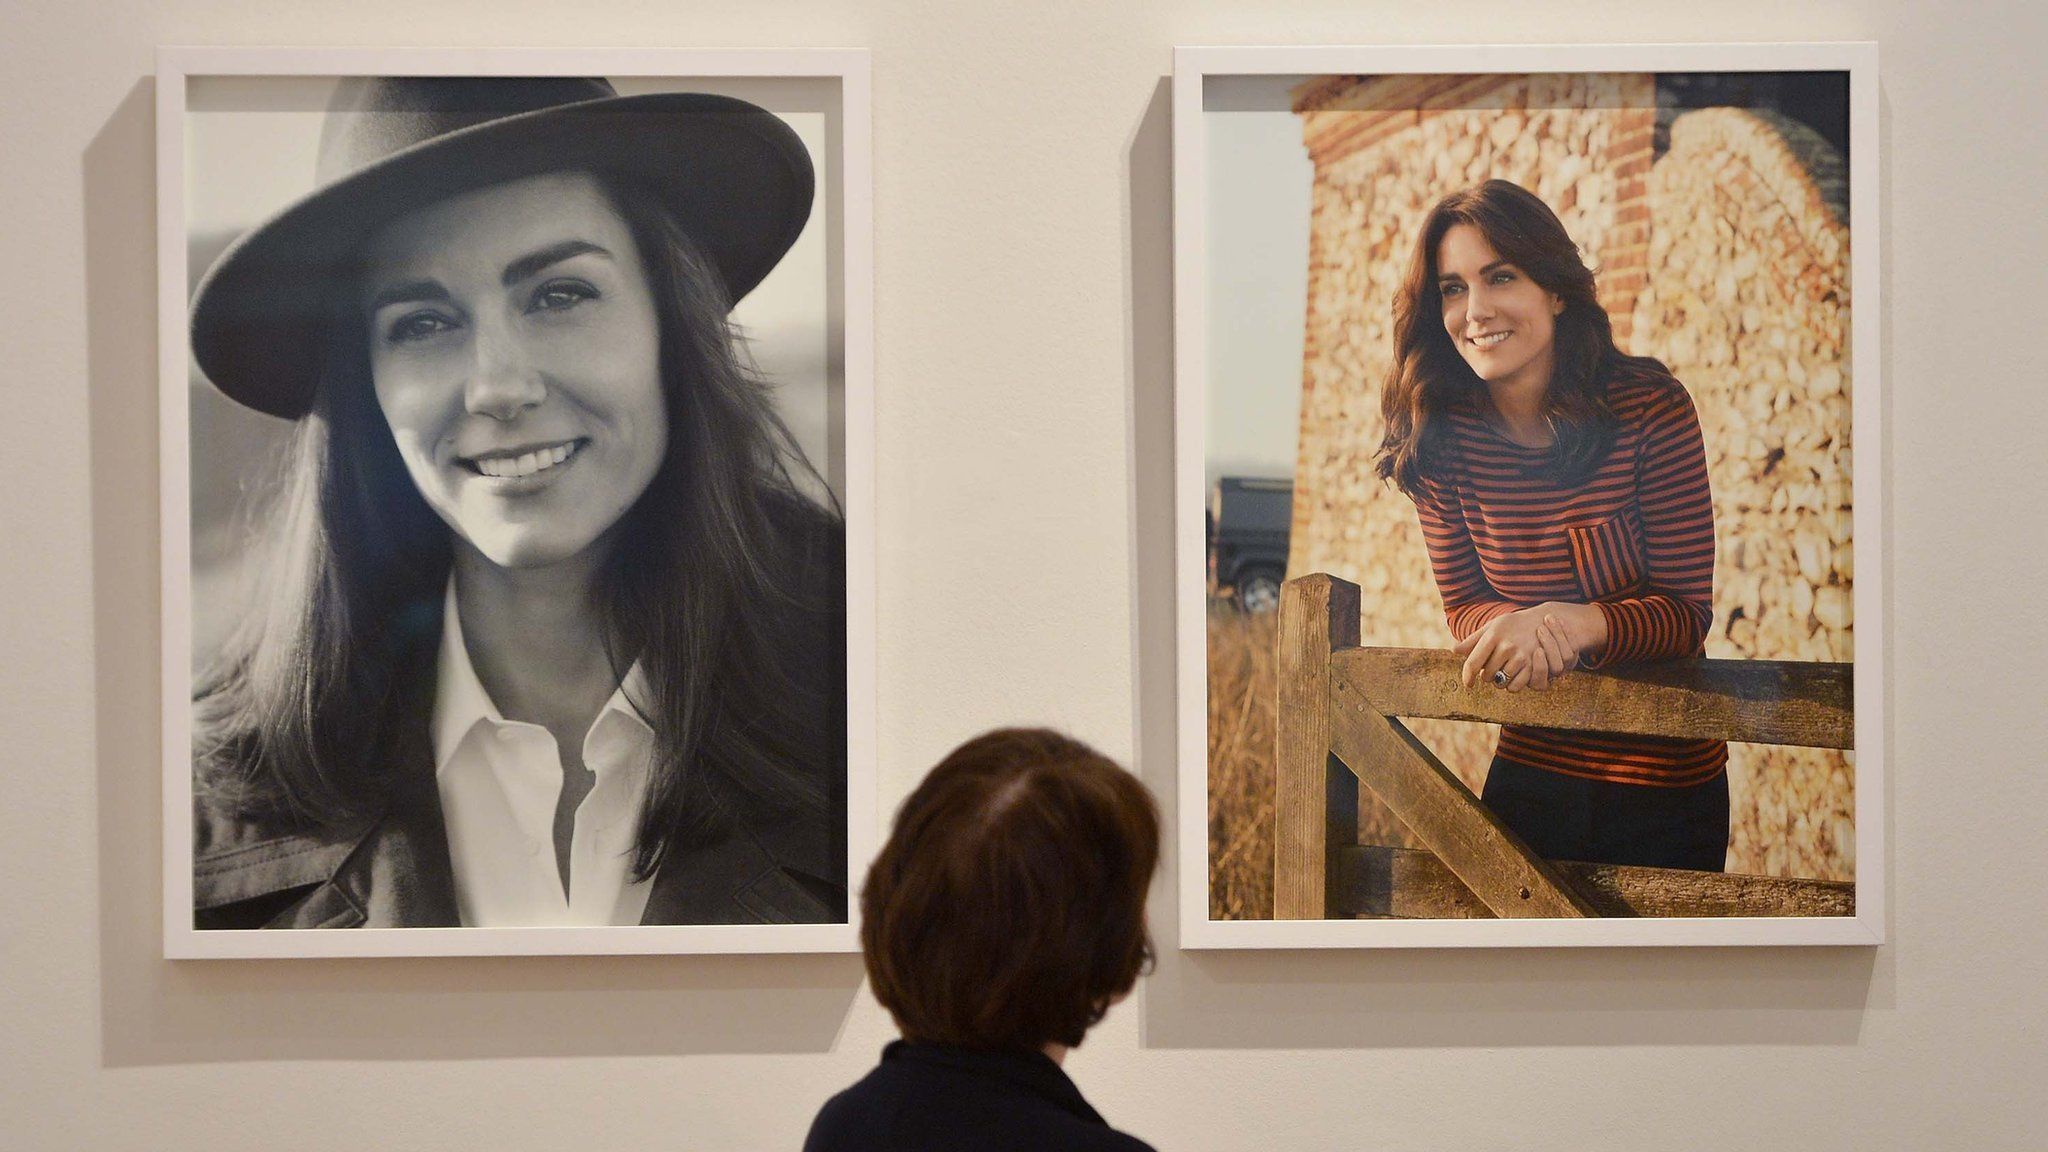 Two new portraits of the Duchess of Cambridge on display at the National Portrait Gallery